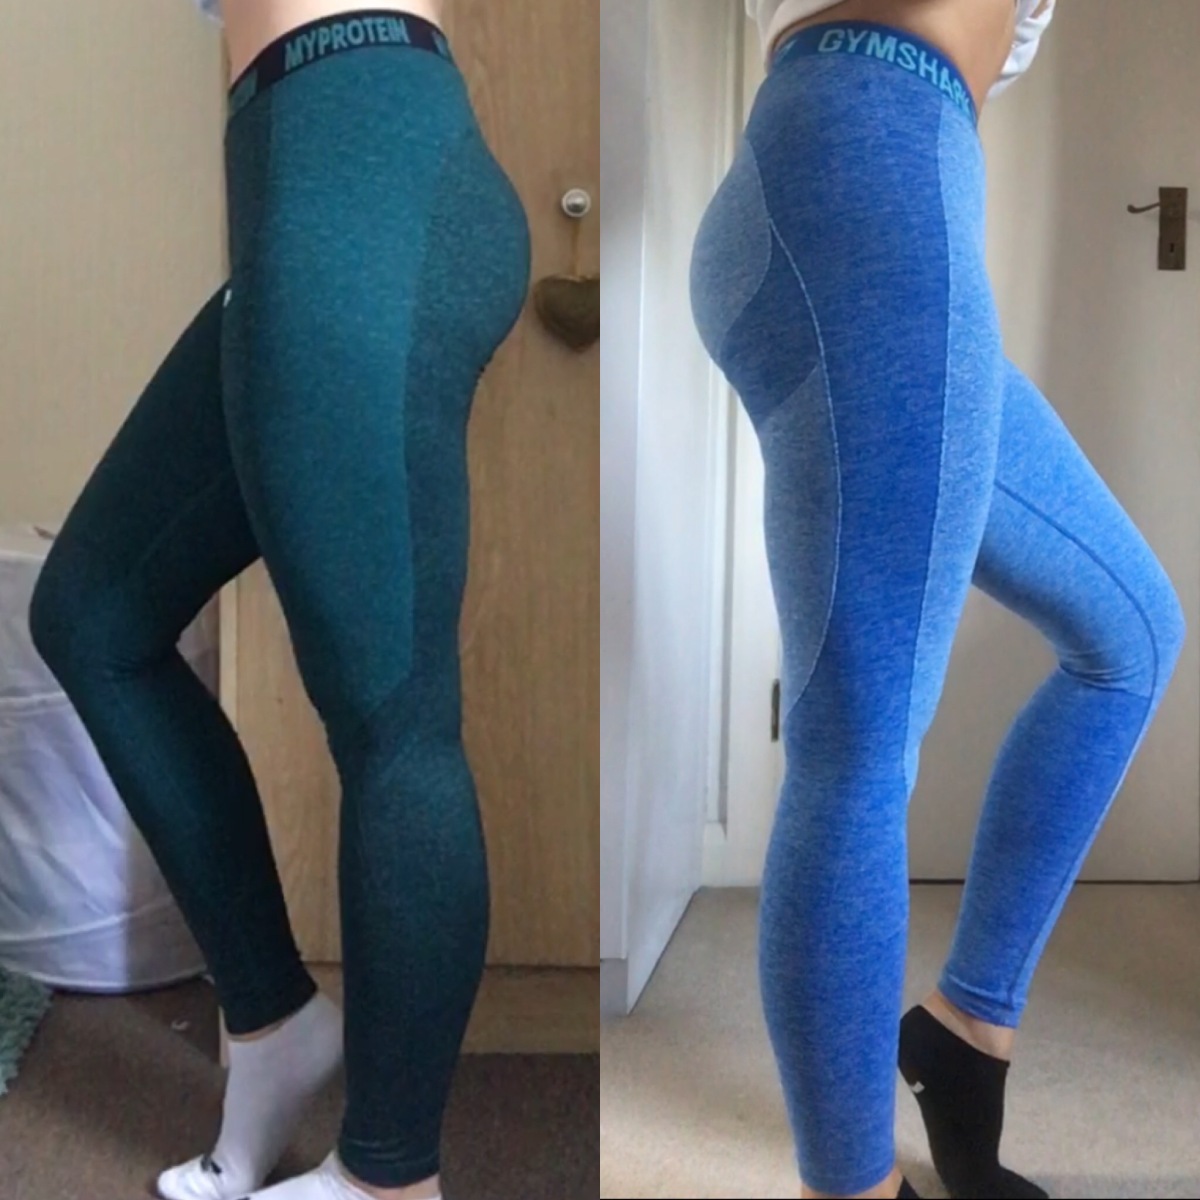 MyProtein Curve Leggings Review